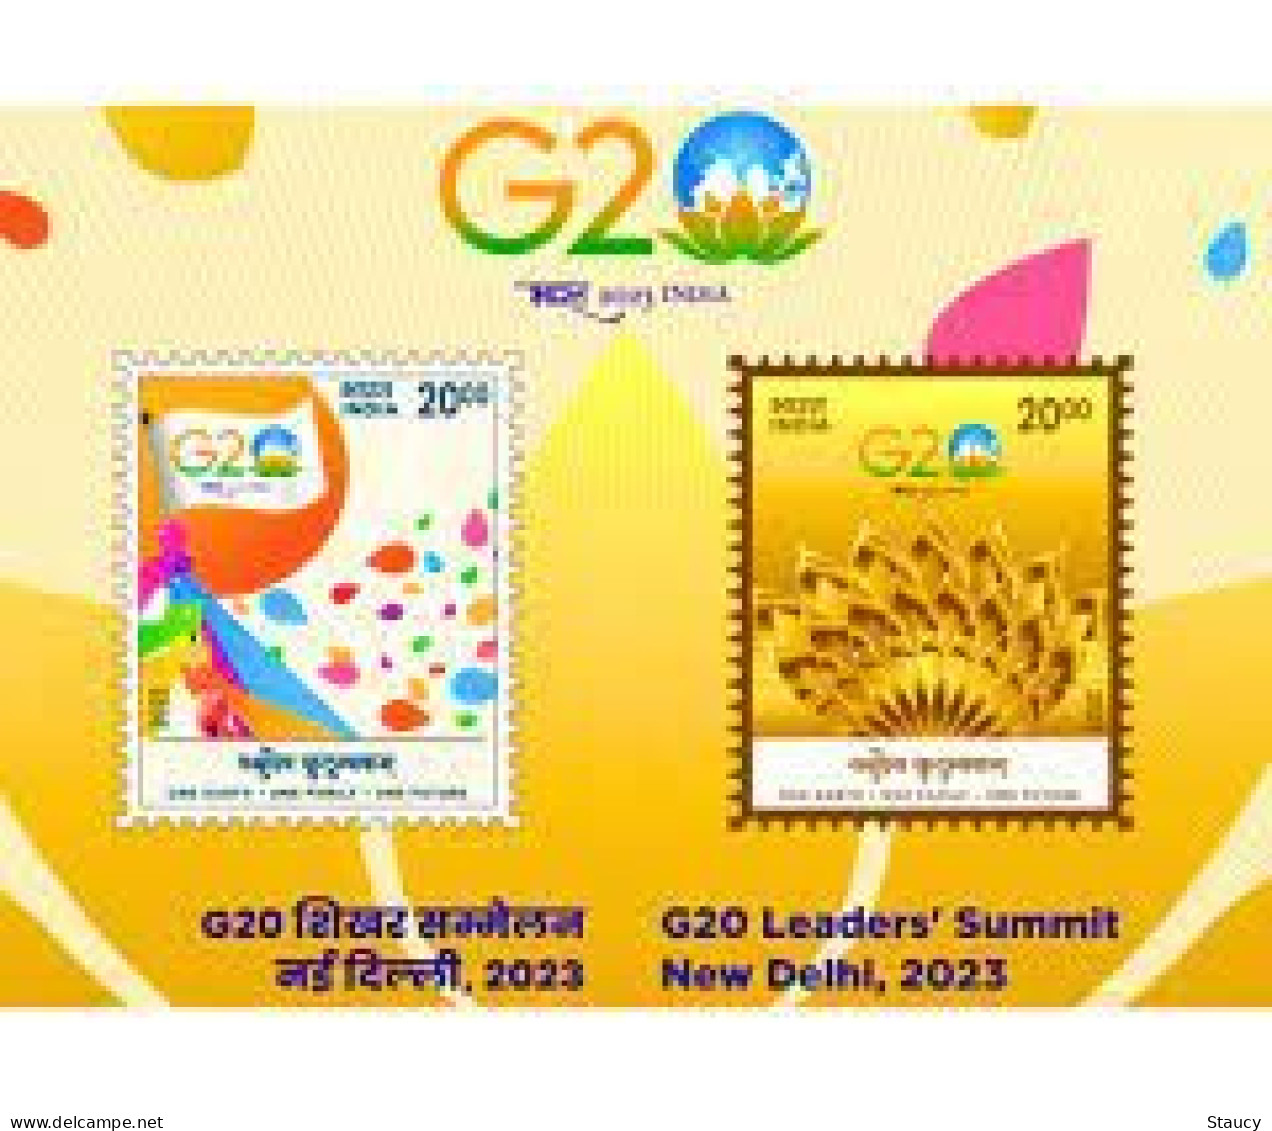 India 2023 Complete Year Collection of 11 Miniature Sheets / Souvenir Sheets / year Pack MNH as per scan